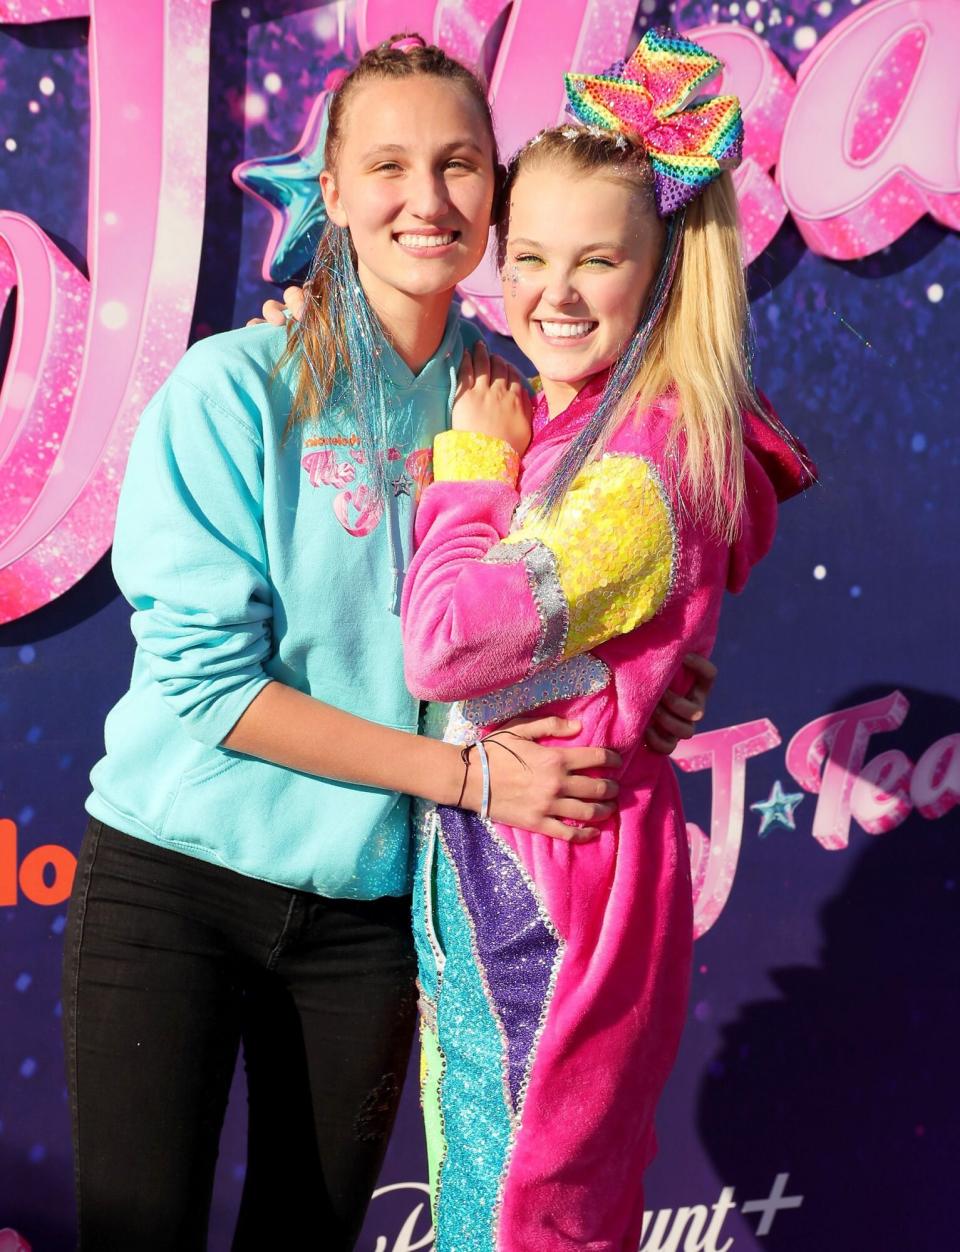 Kylie Prew and JoJo Siwa attend a drive-in screening and performance for the Paramount+ original movie "The J Team" at the Rose Bowl on September 03, 2021 in Pasadena